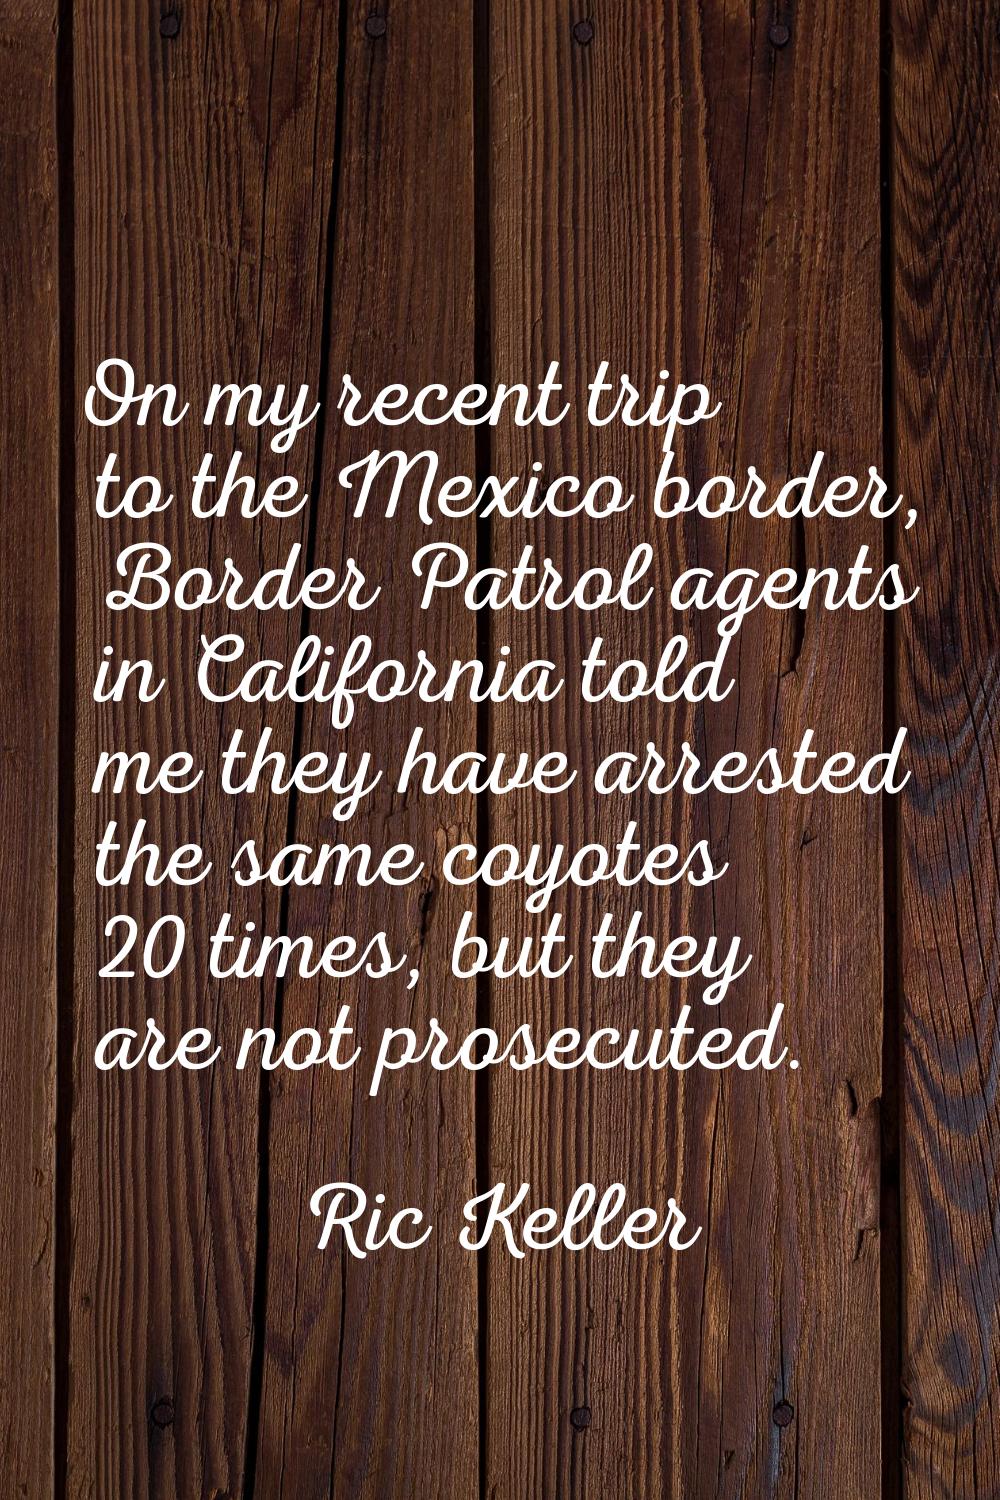 On my recent trip to the Mexico border, Border Patrol agents in California told me they have arrest